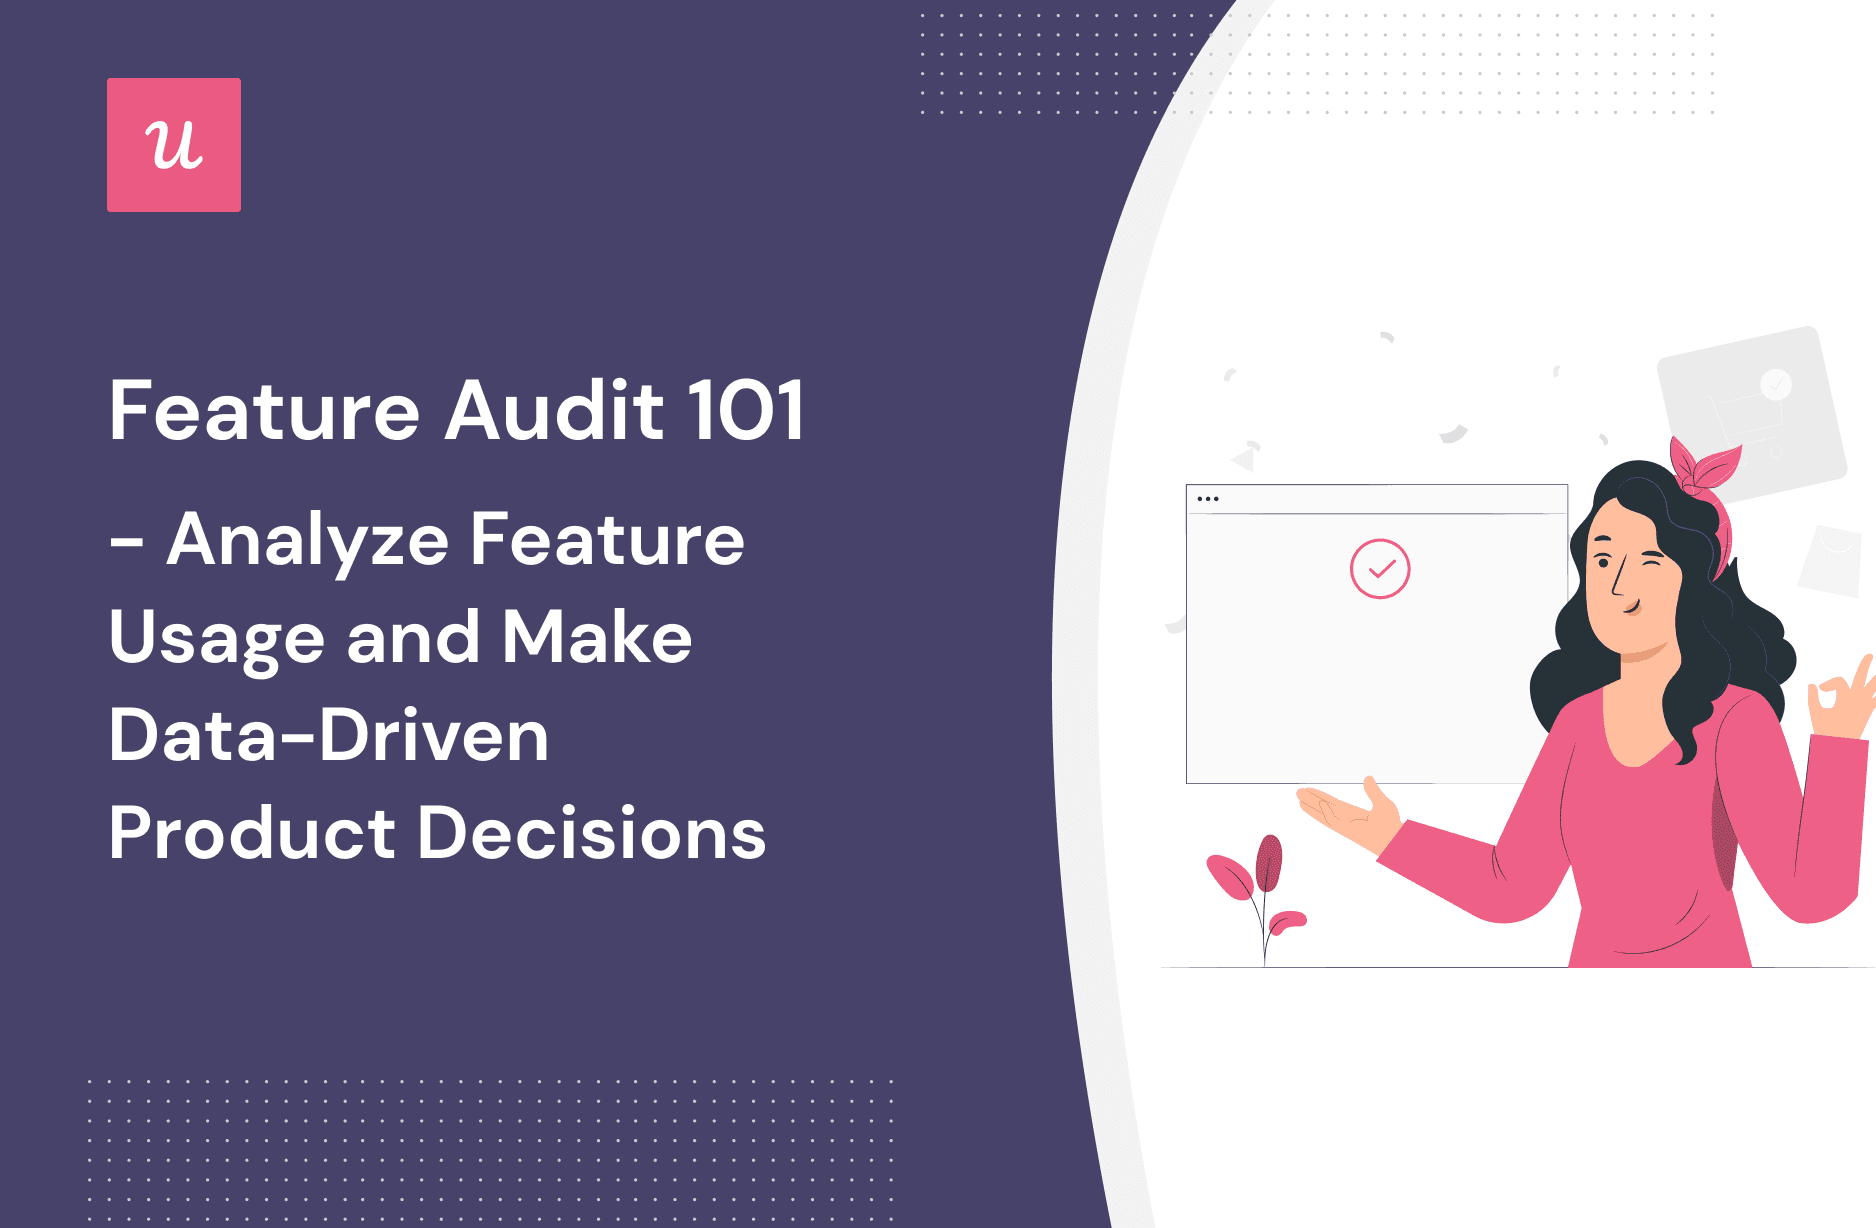 Feature Audit 101- Analyze Feature Usage and Make Data-Driven Product Decisions cover